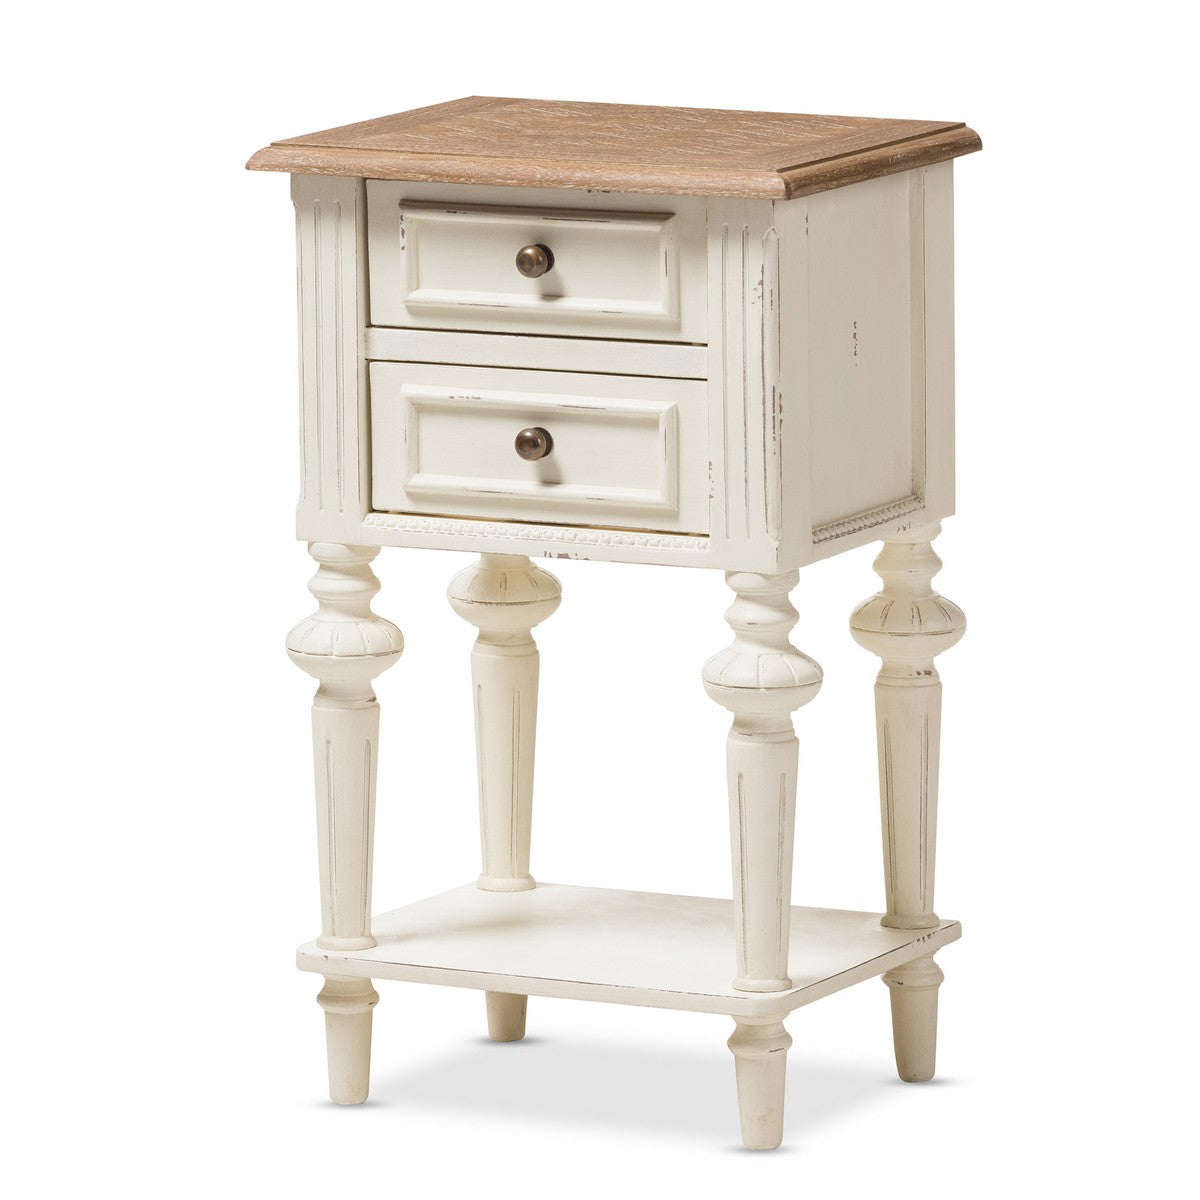 Baxton Studio Marquetterie French Provincial Style Weathered Oak and White Wash Distressed Finish Wood Two-Tone 2-Drawer and 1-Shelf Nightstand Baxton Studio-nightstands-Minimal And Modern - 1